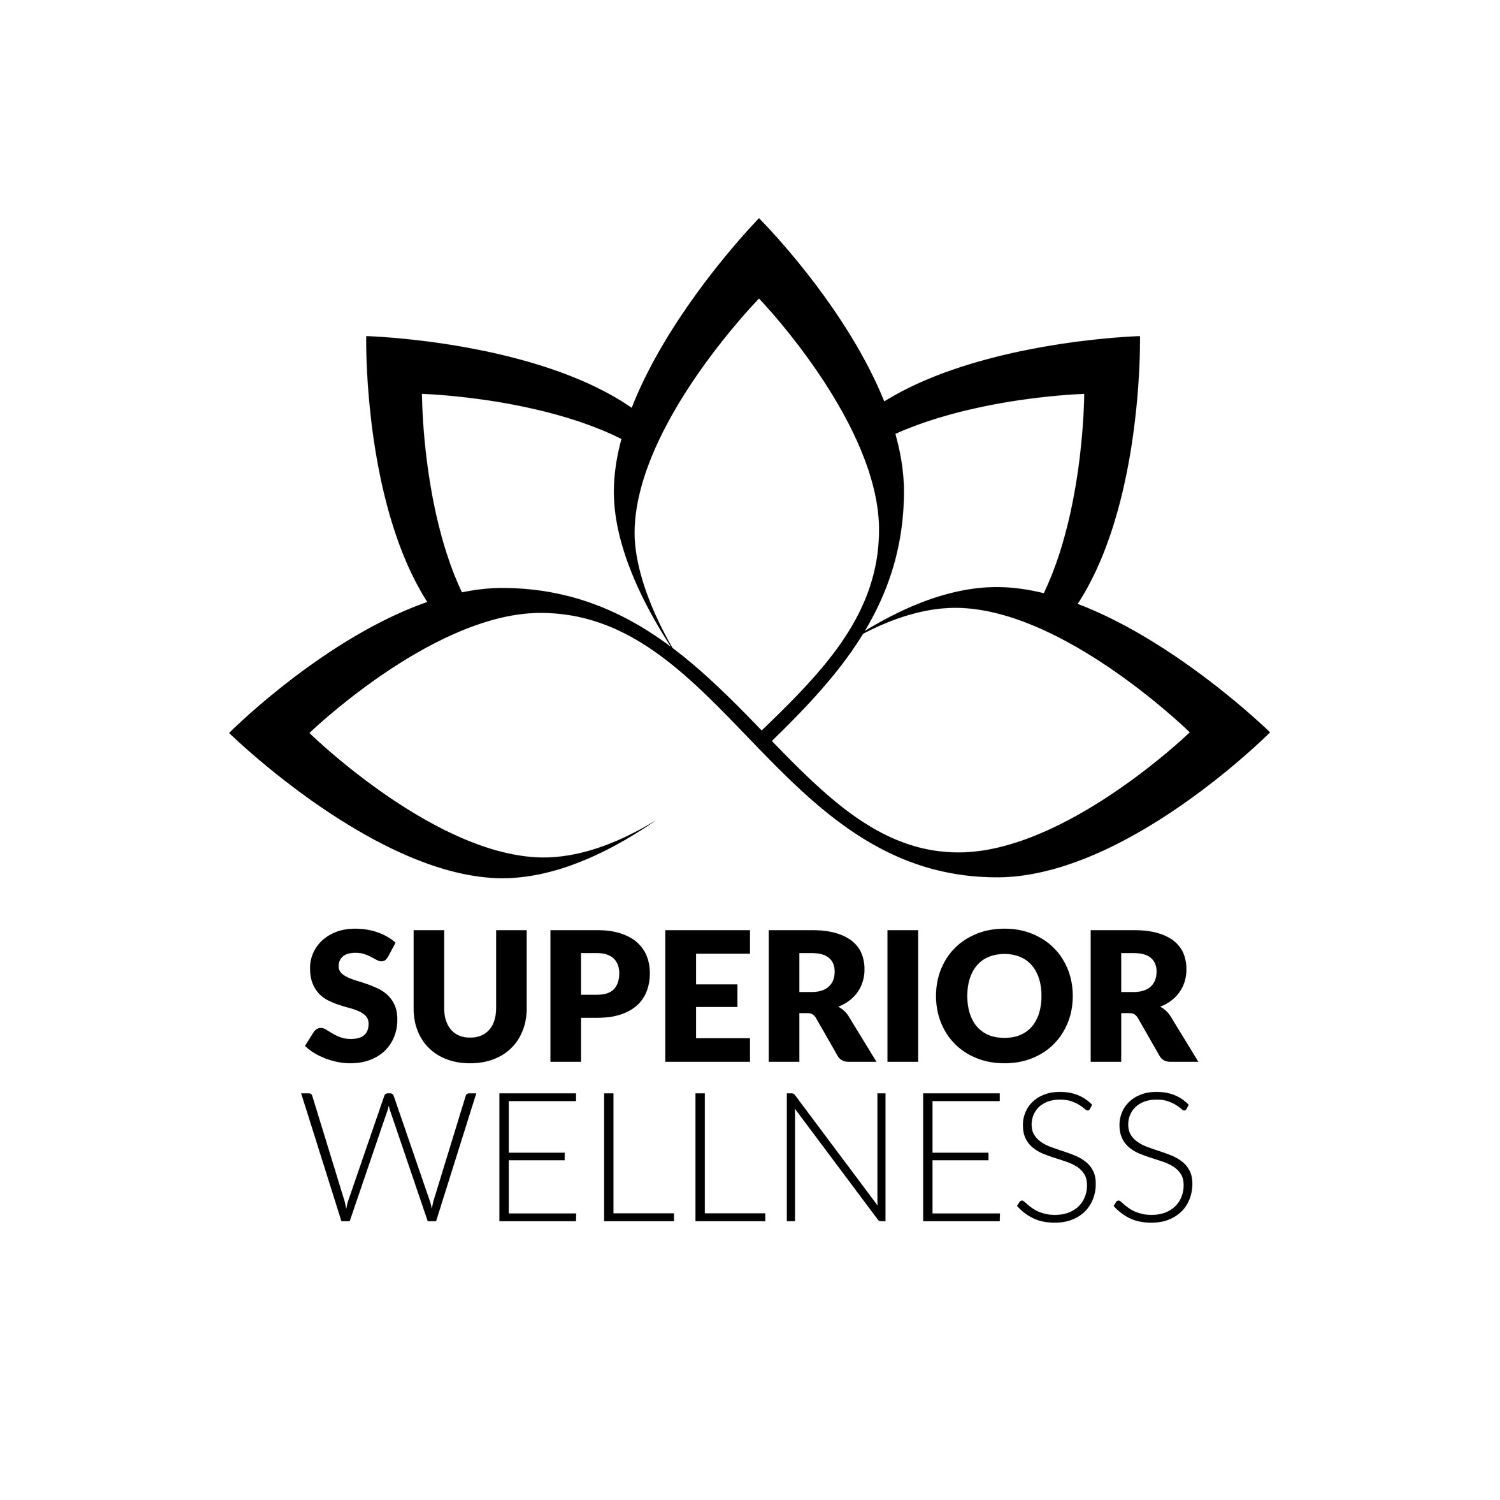 Welcome to our new Superior Wellness team members!